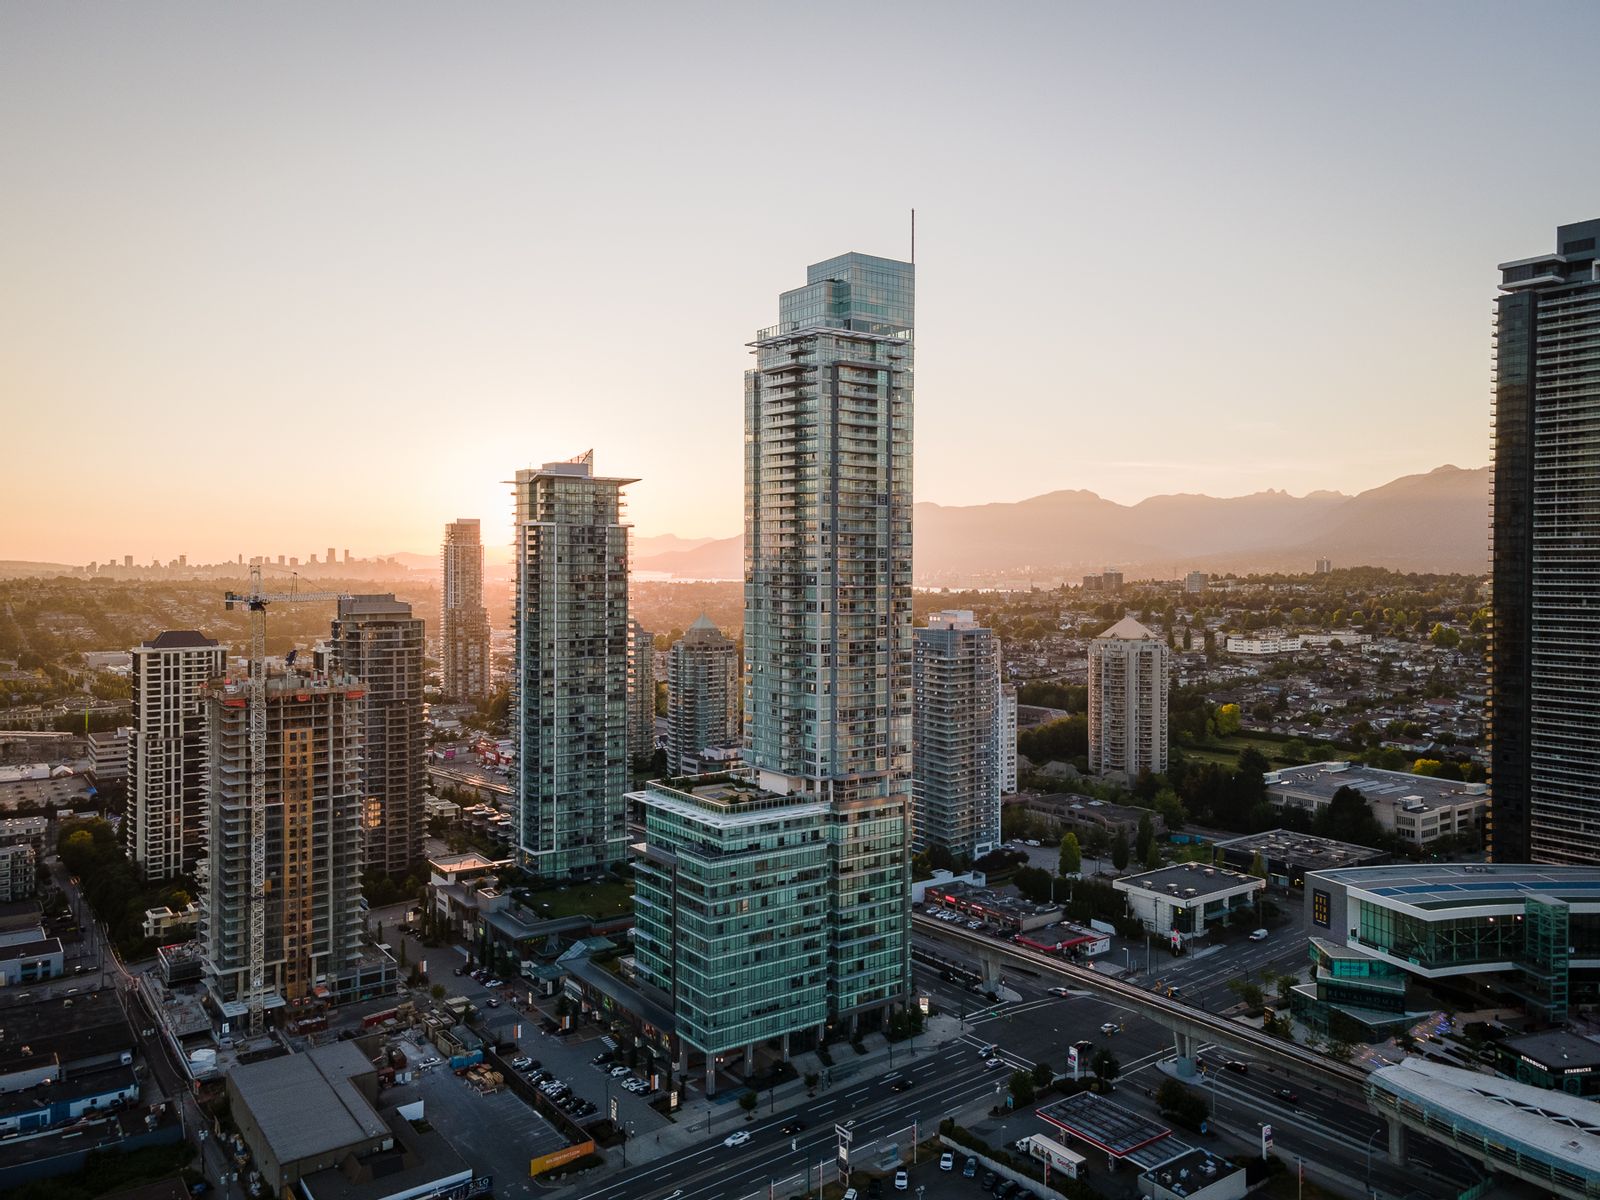 How To Choose A Pre-sale Condo That’s Right For You